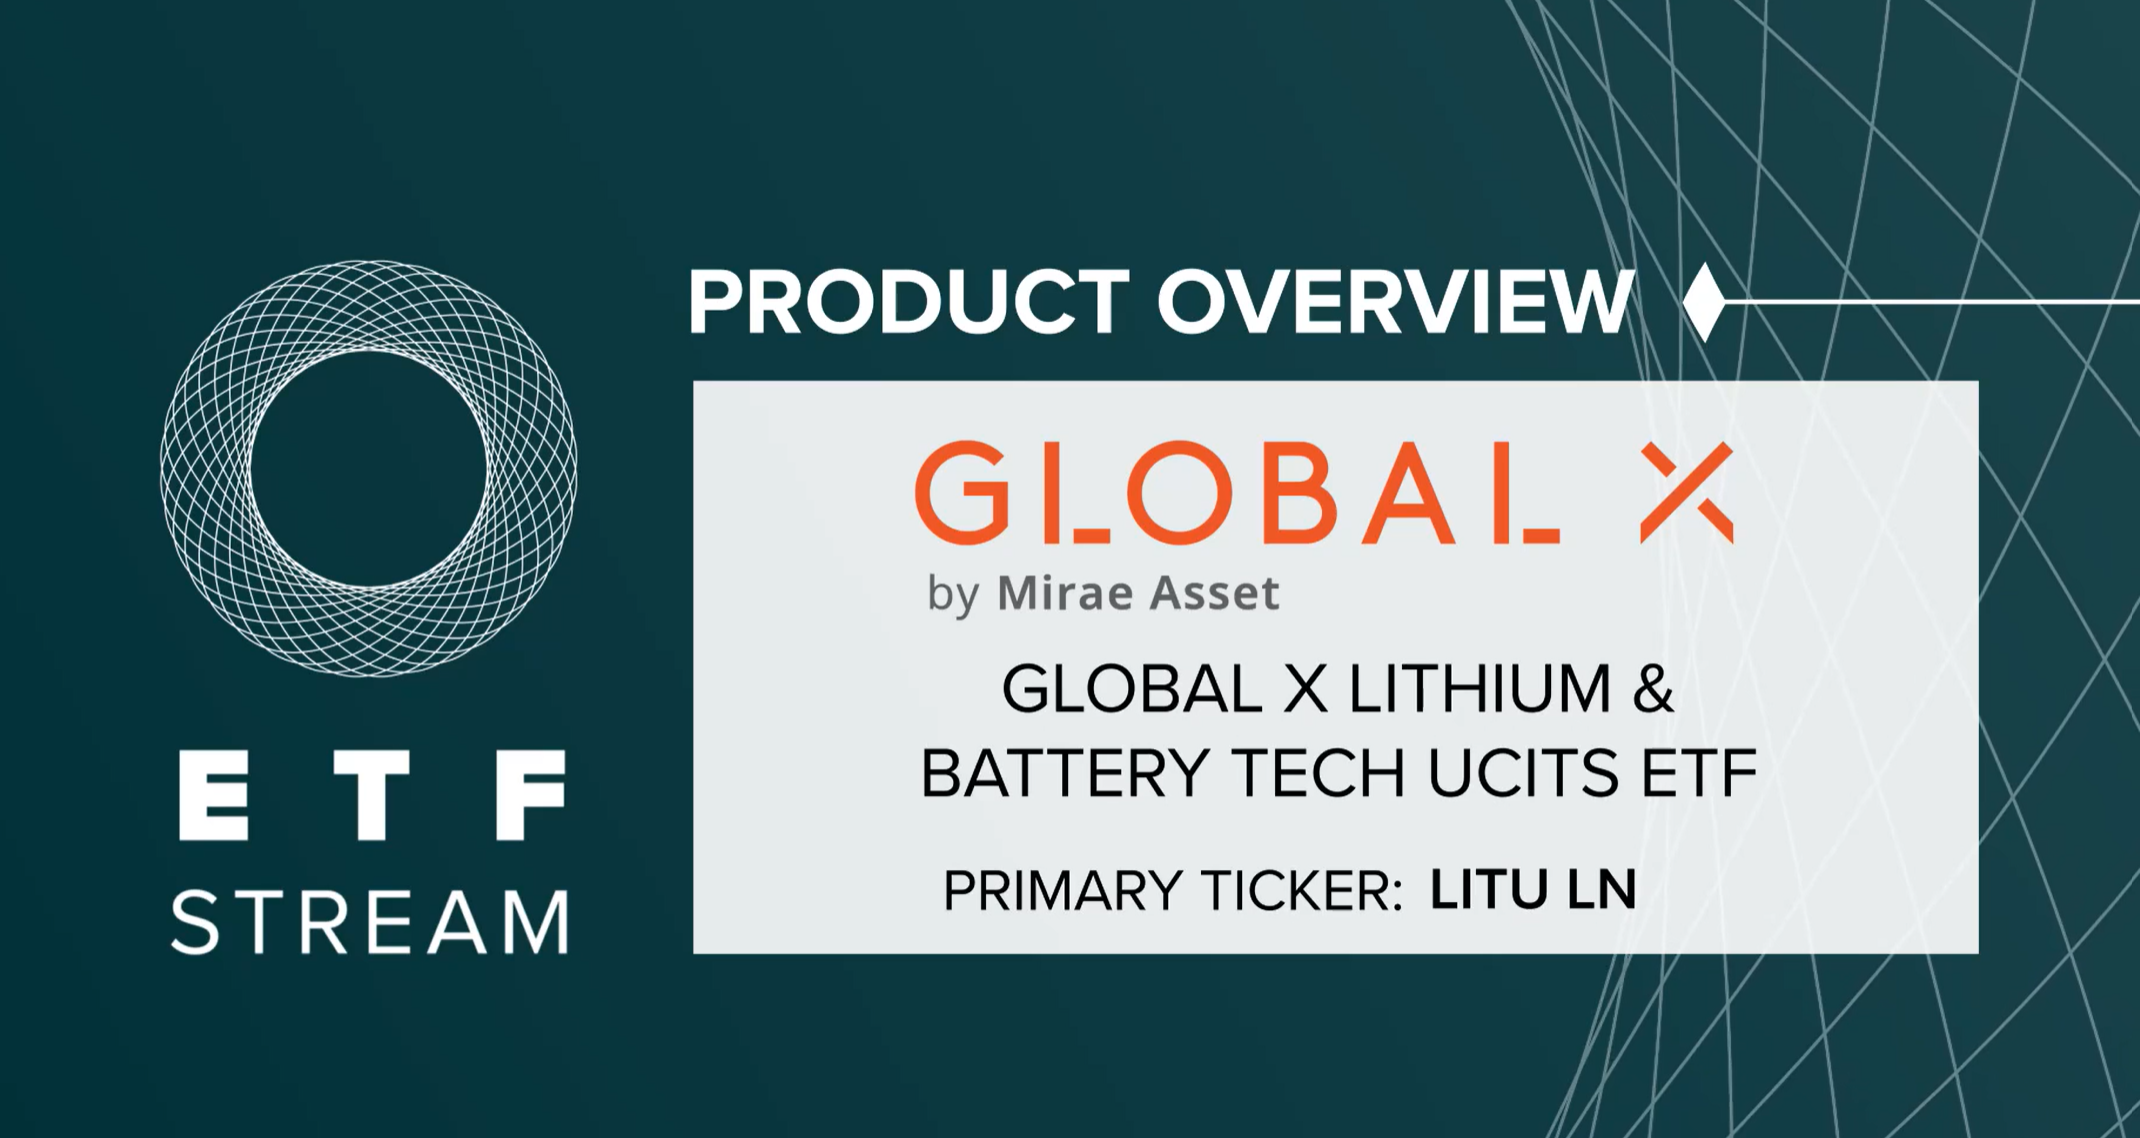 Product Overview Global X Lithium & Battery Tech UCITS ETF